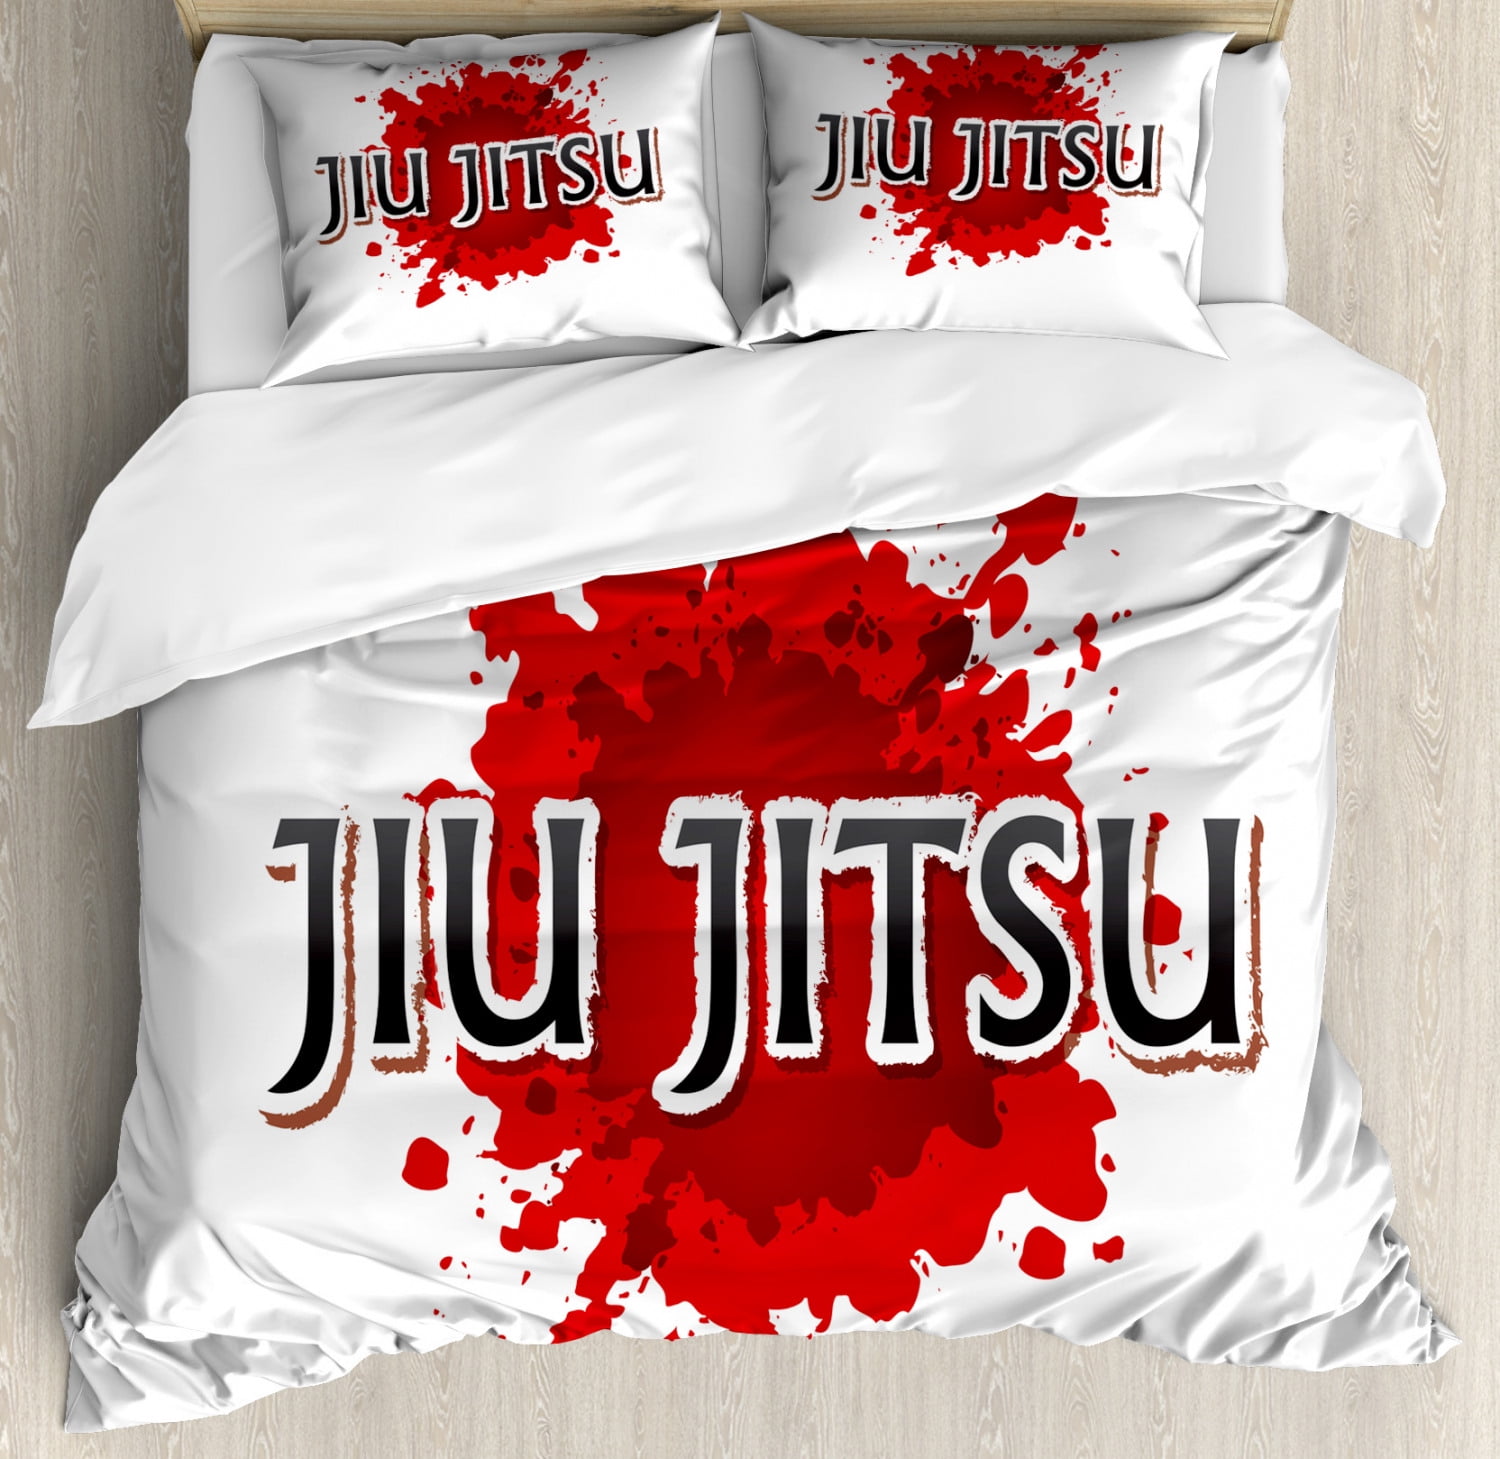 Ambesonne Jiu Jitsu Bedspread Decorative Quilted 2 Piece Coverlet Set with Pillow Sham Twin Size Charcoal Grey Japanese Martial Arts Typography on Color Splash Background